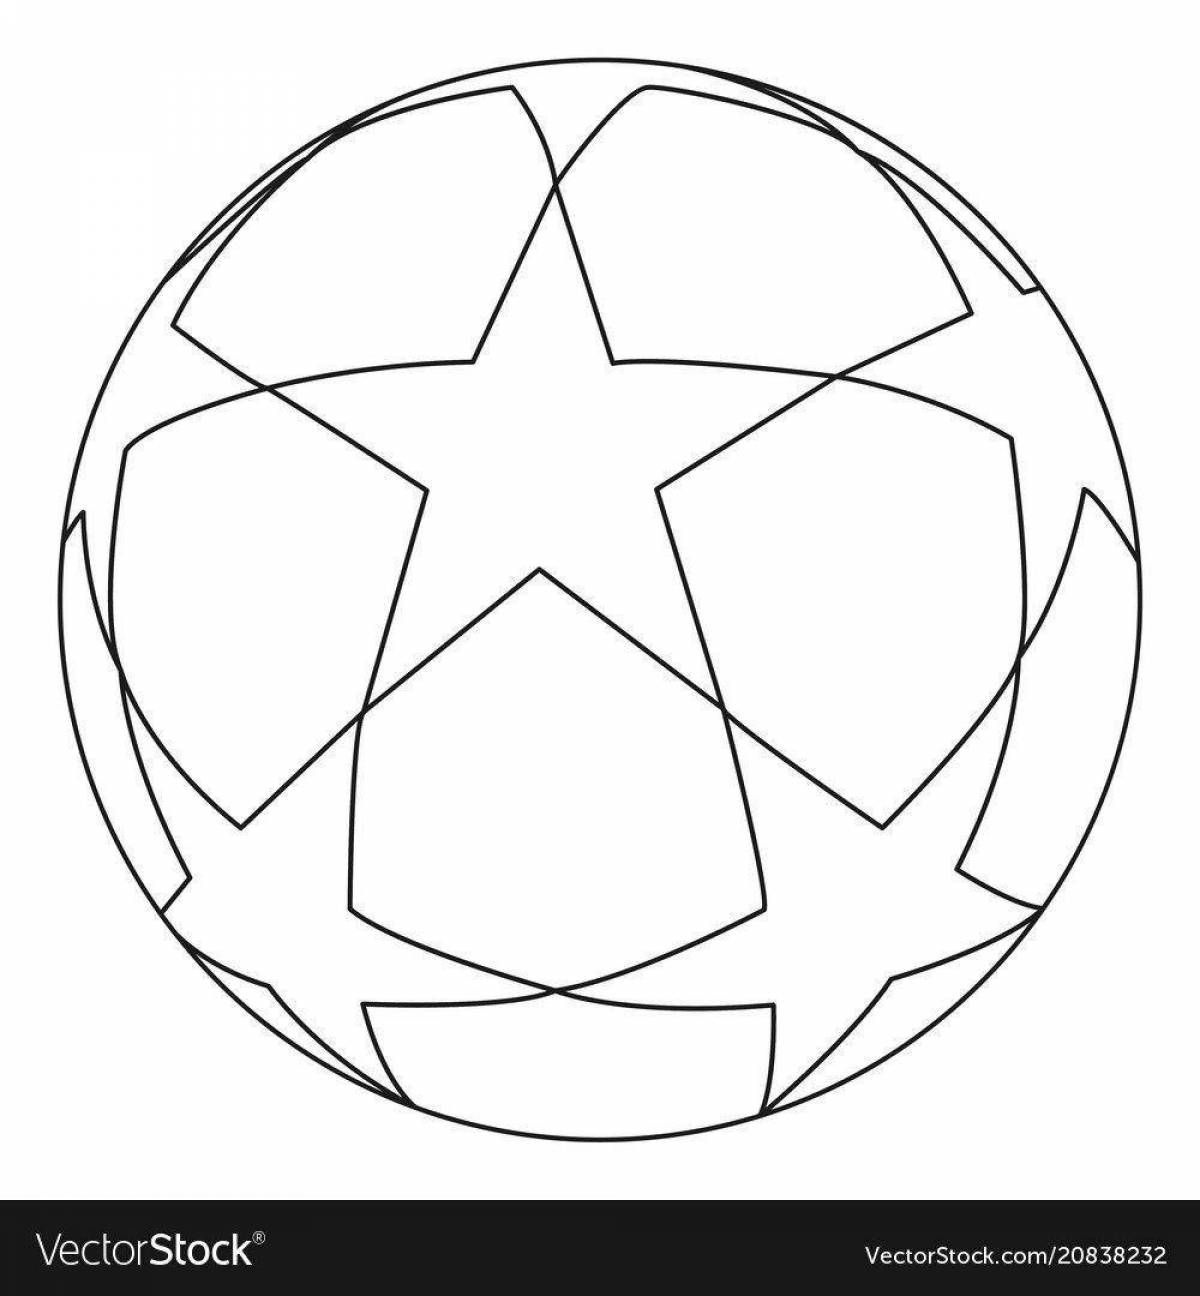 Glowing golden ball coloring page